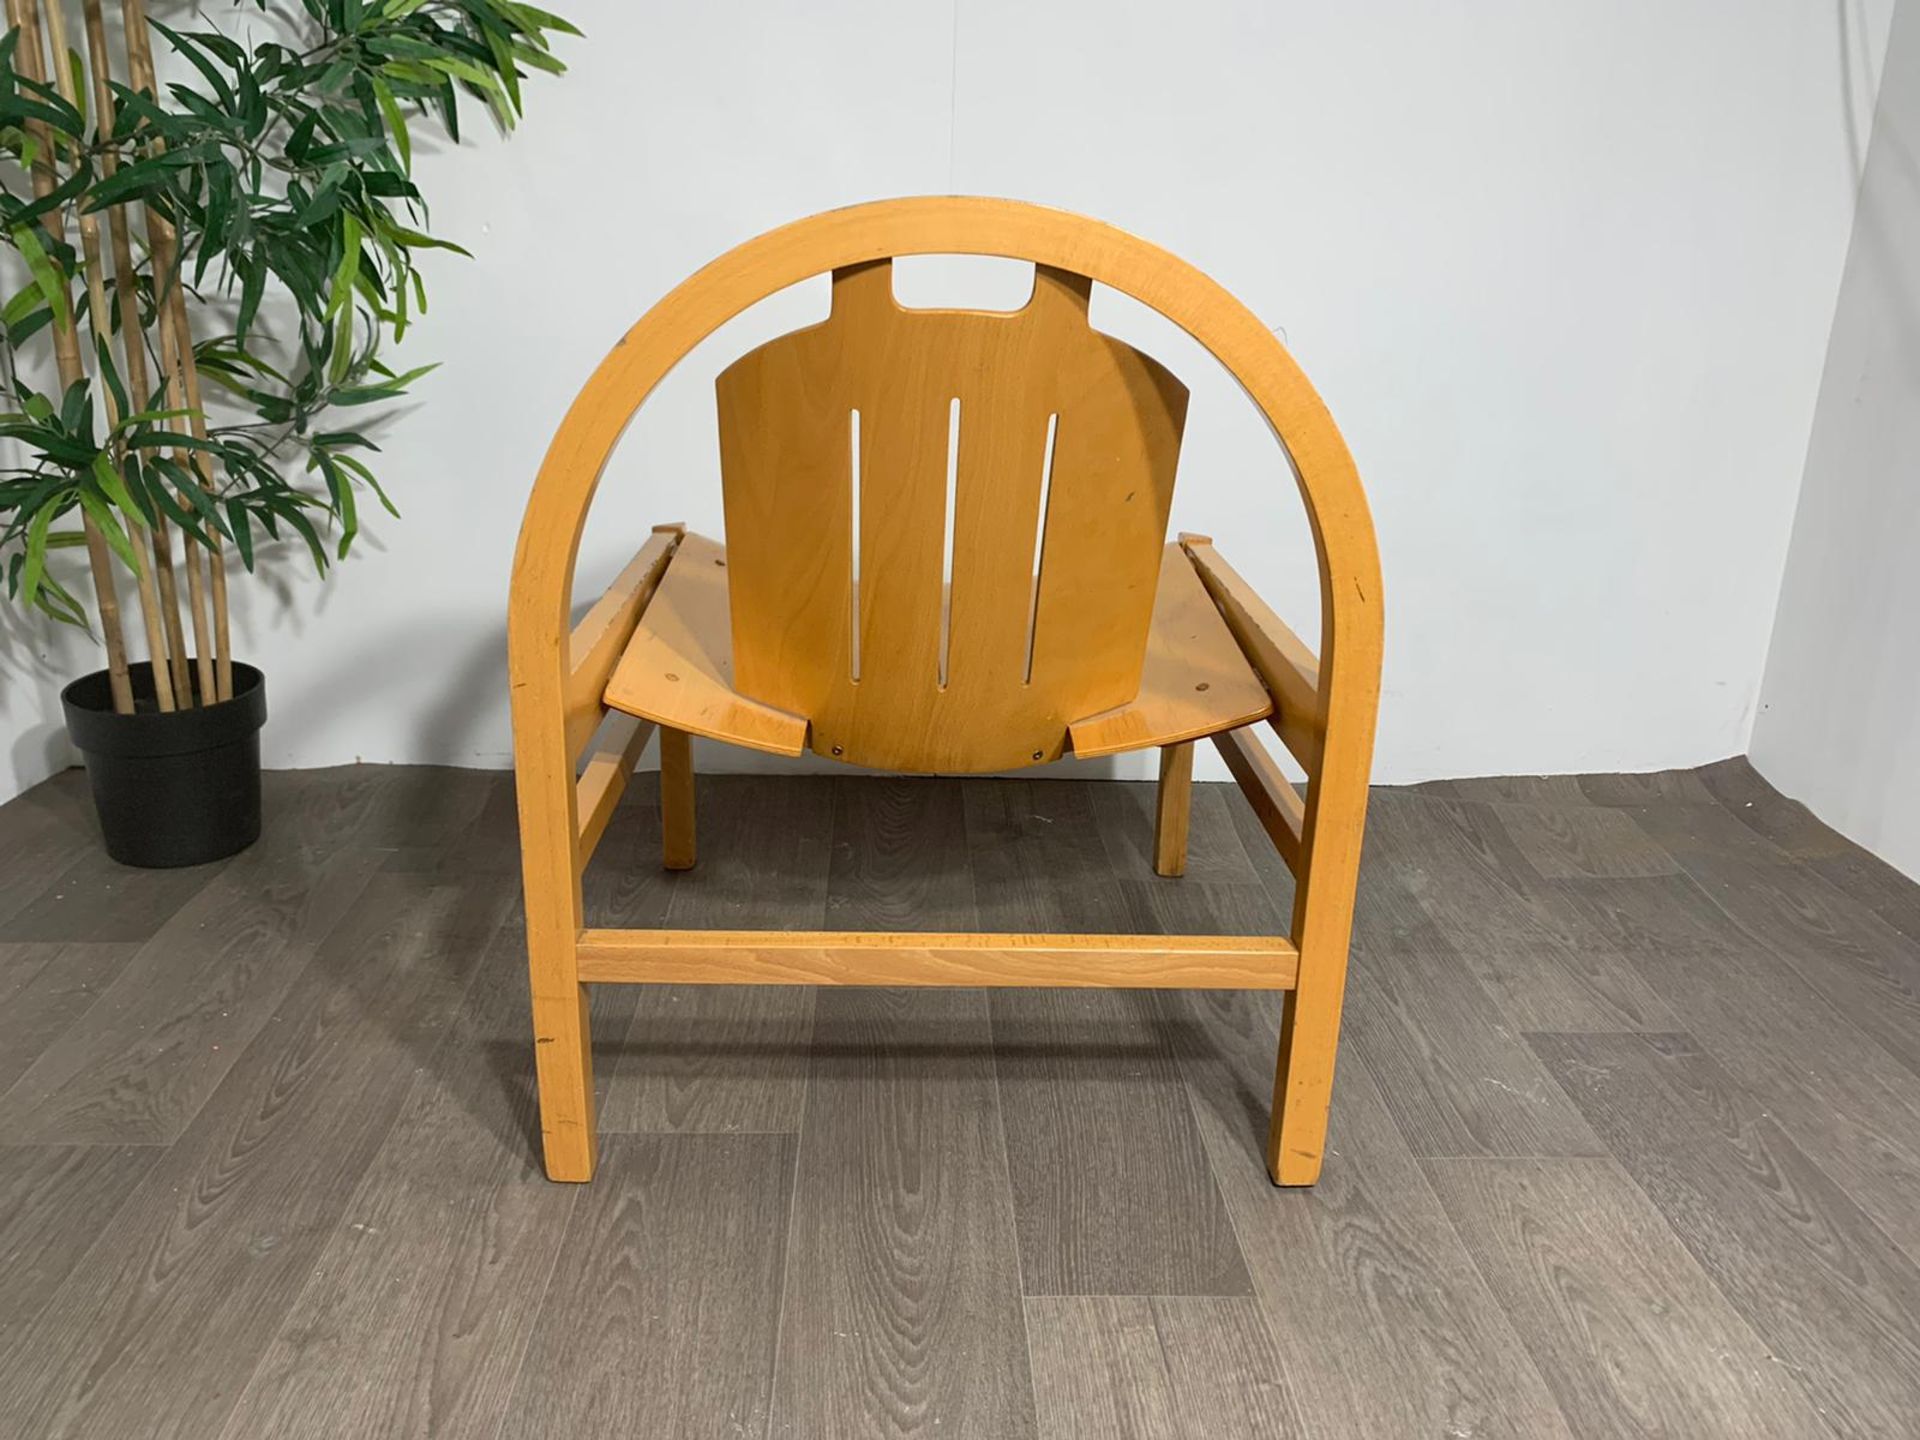 Wood Feature Chair - Image 4 of 6